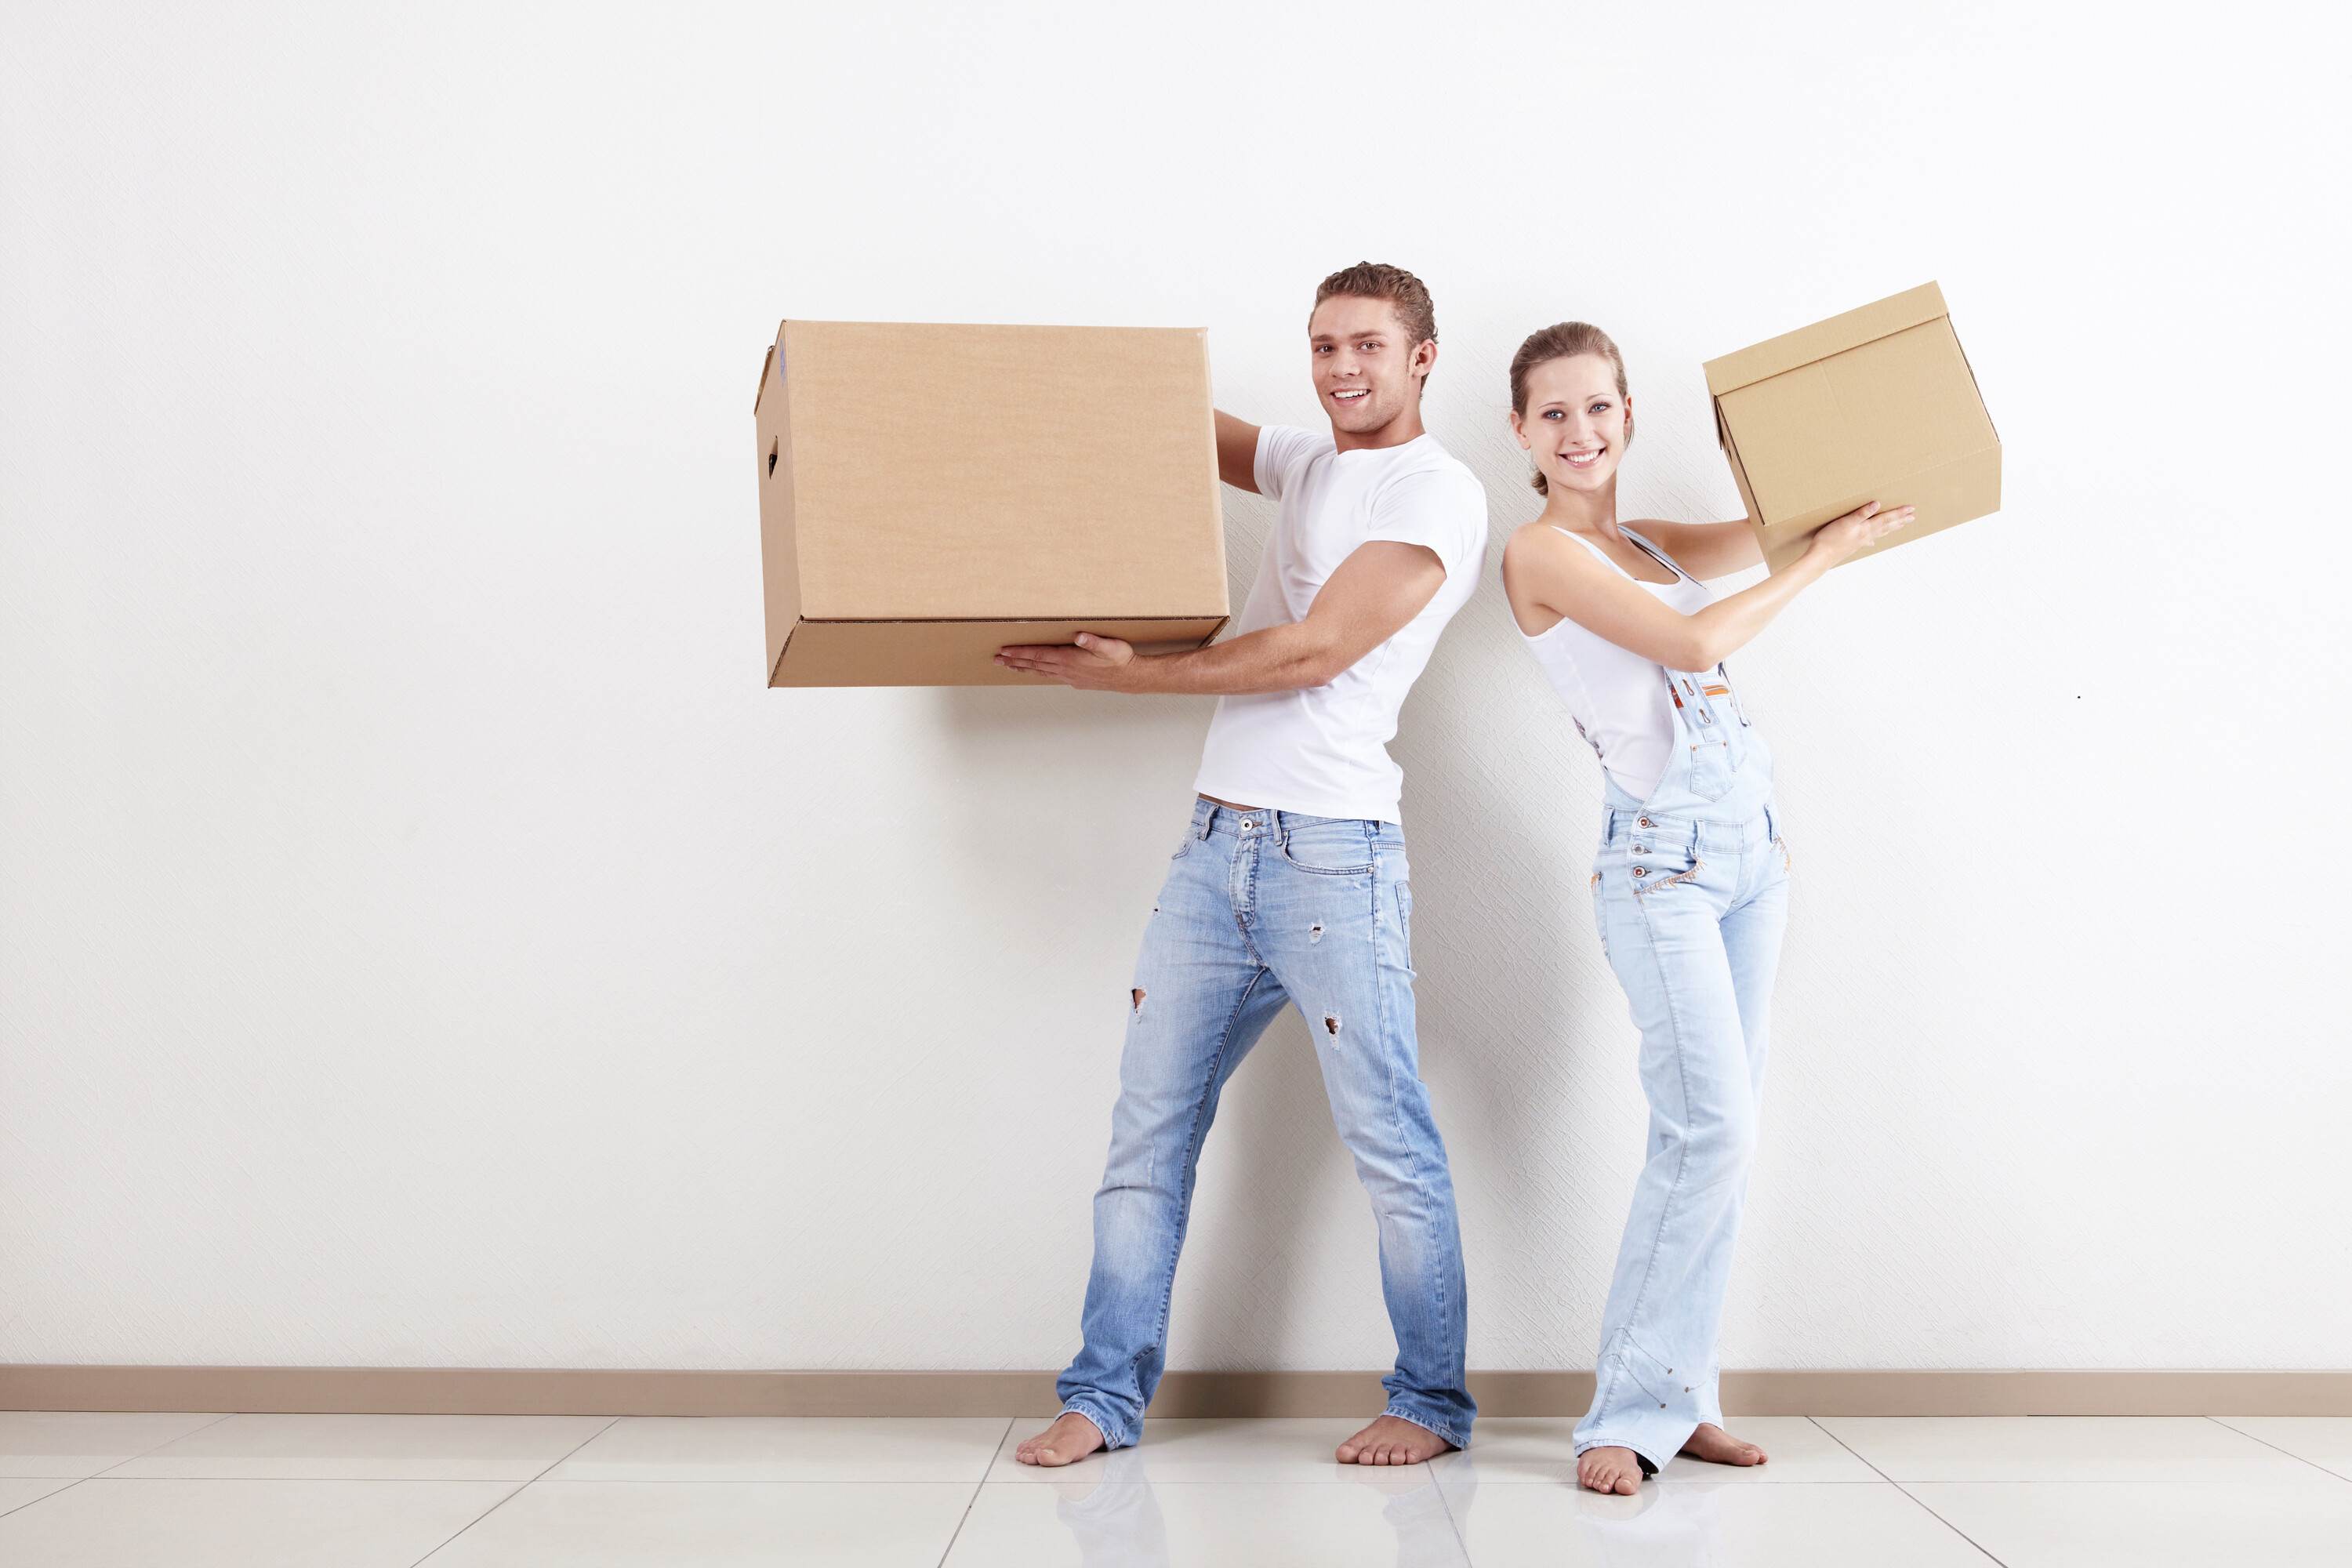 Man and woman standing back to back dresseed in jeans each holding moving boxes.